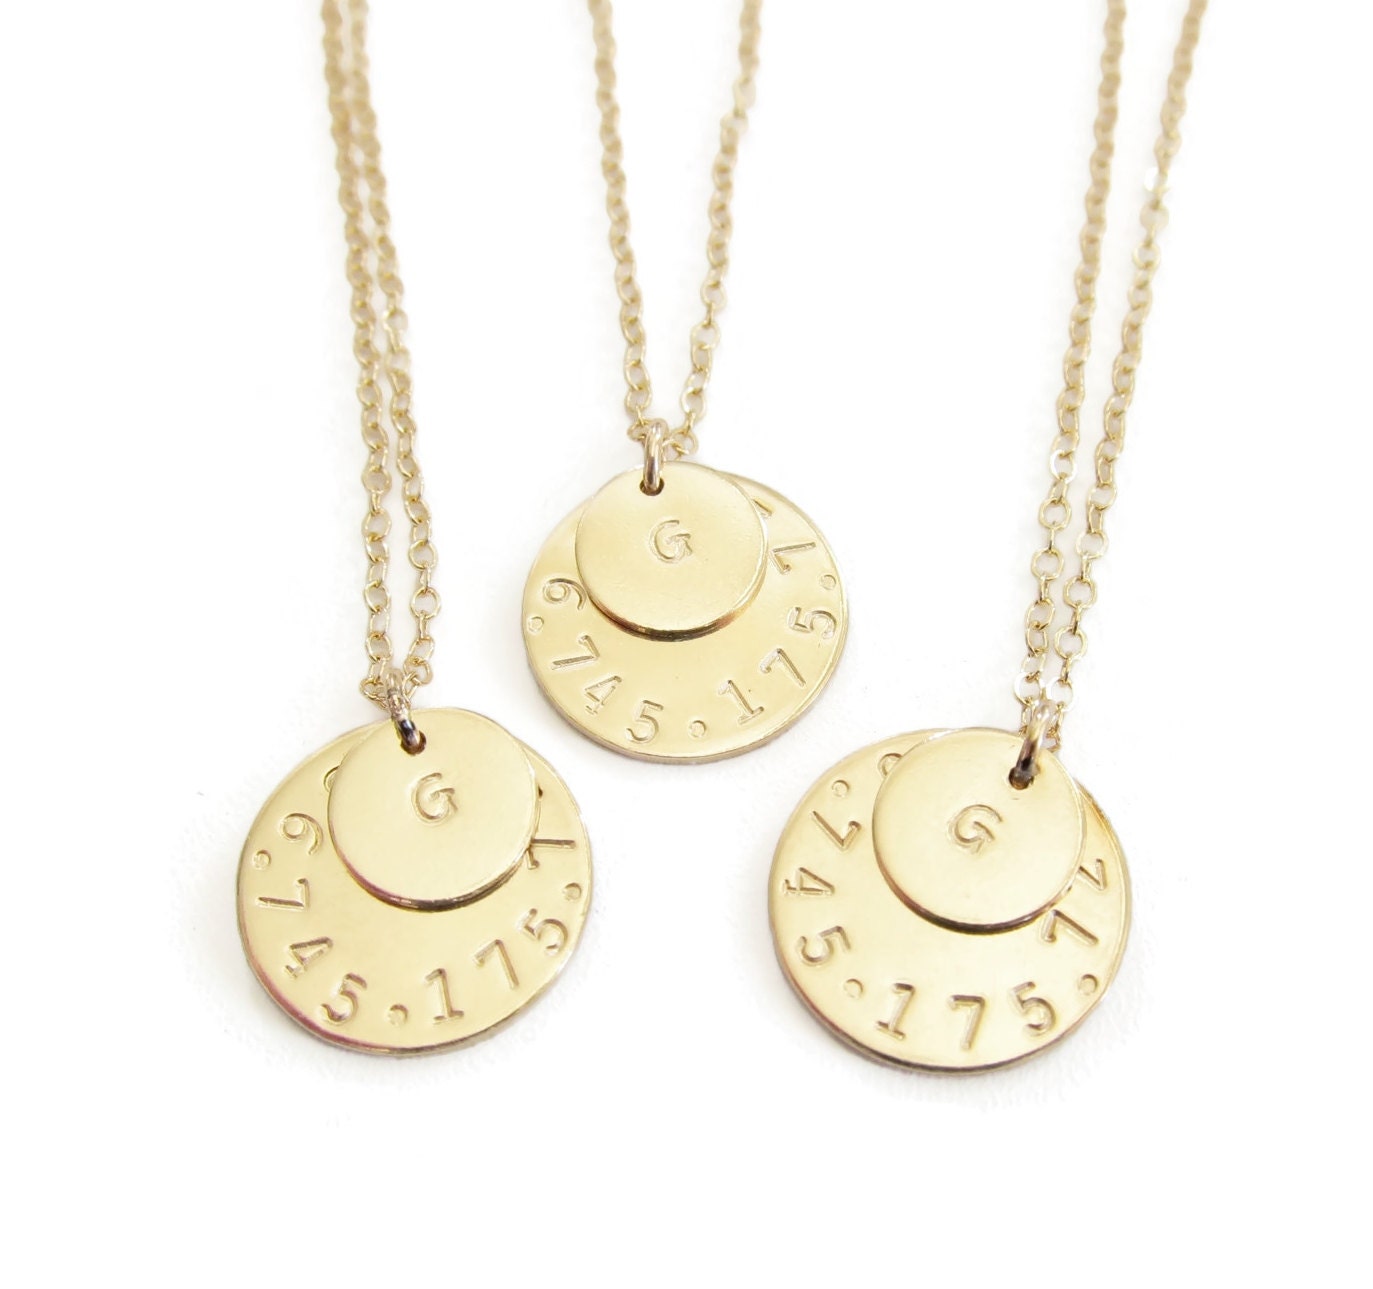 Personalized Disc Coordinate Necklace 14K Gold Filled